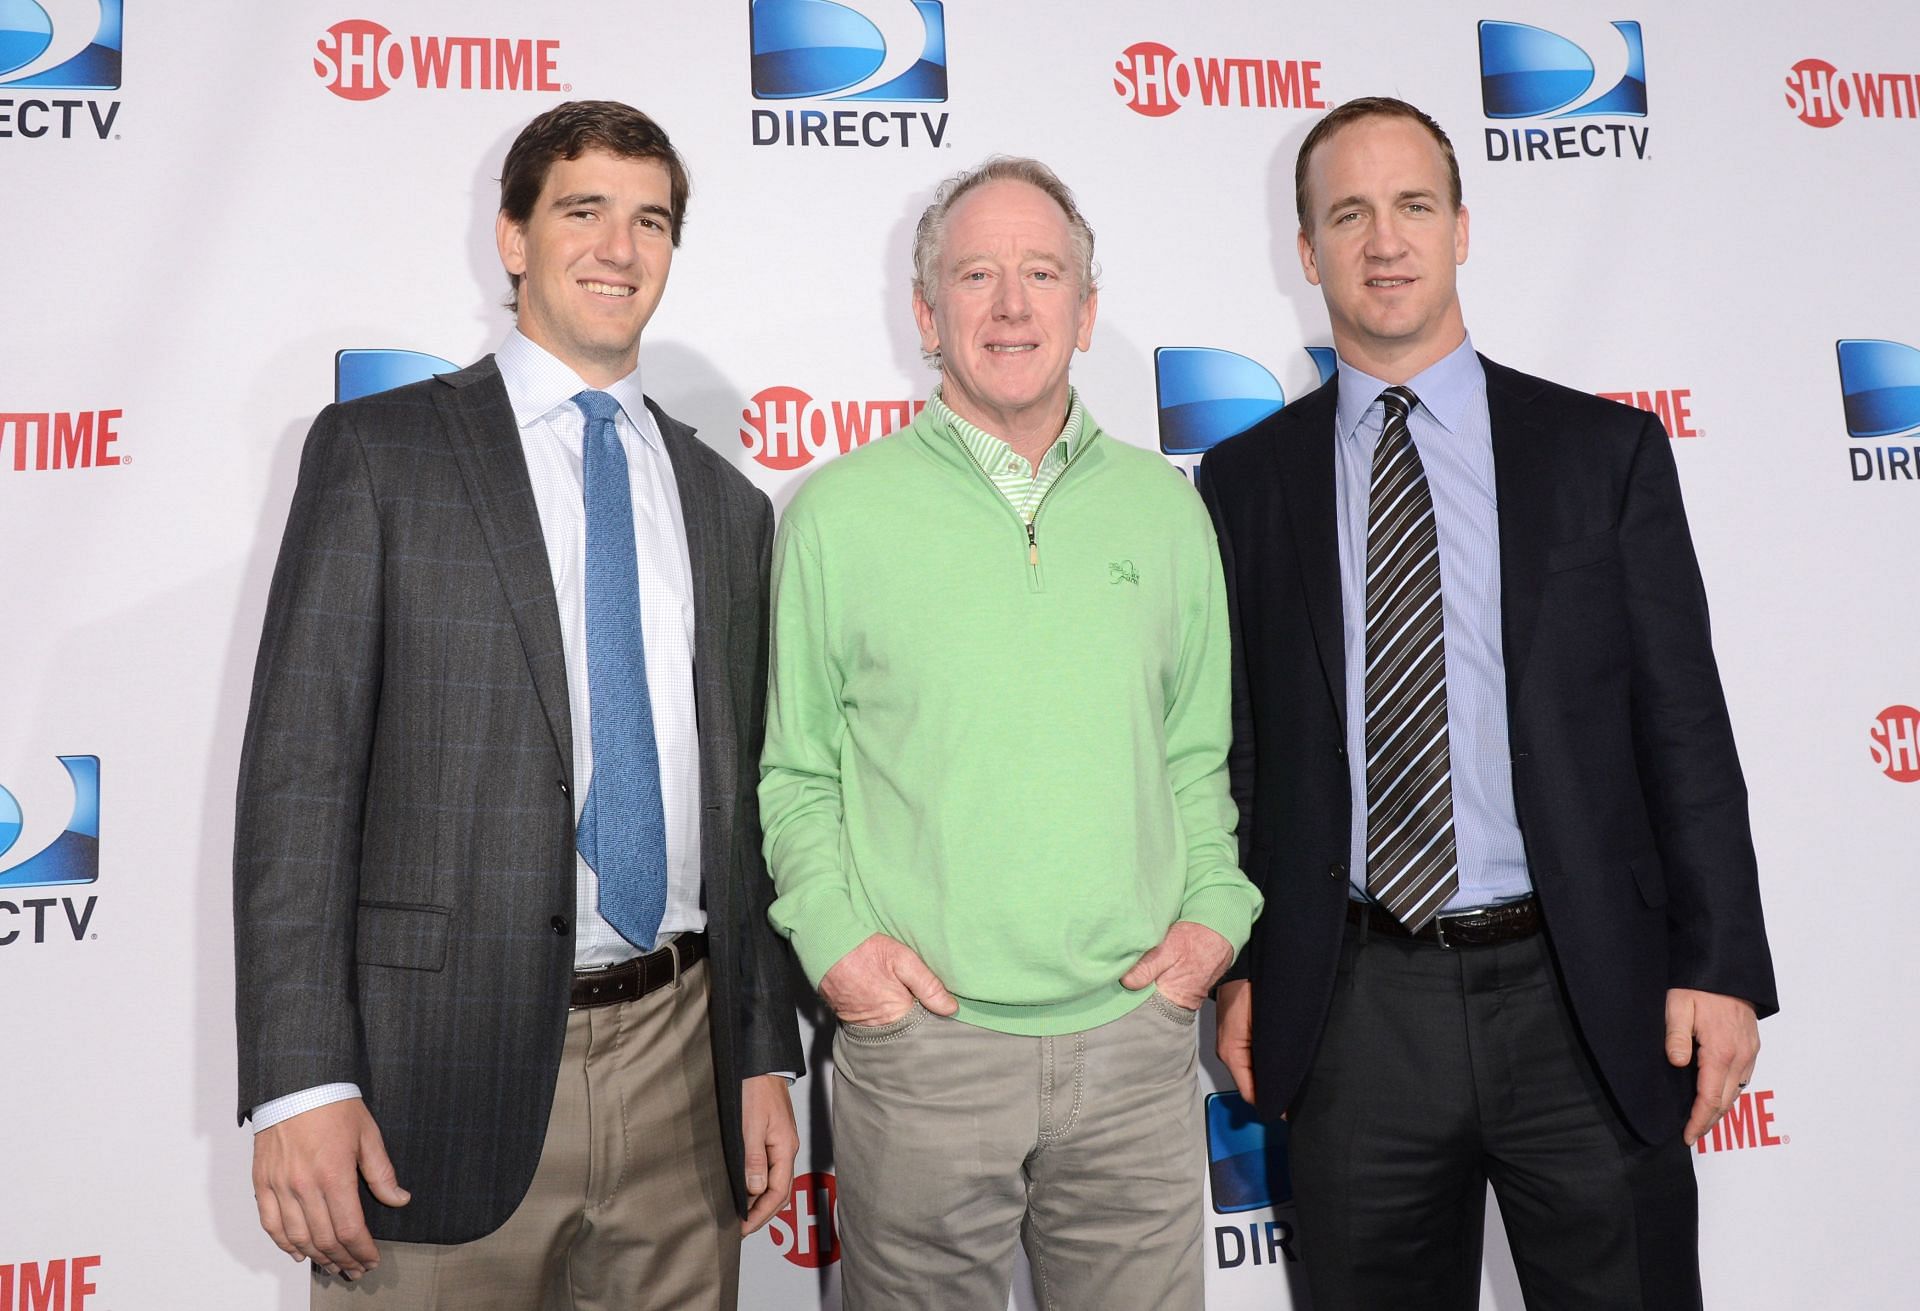 DIRECTV&#039;S Seventh Annual Celebrity Beach Bowl - Eli, Archie, and Peyton Manning